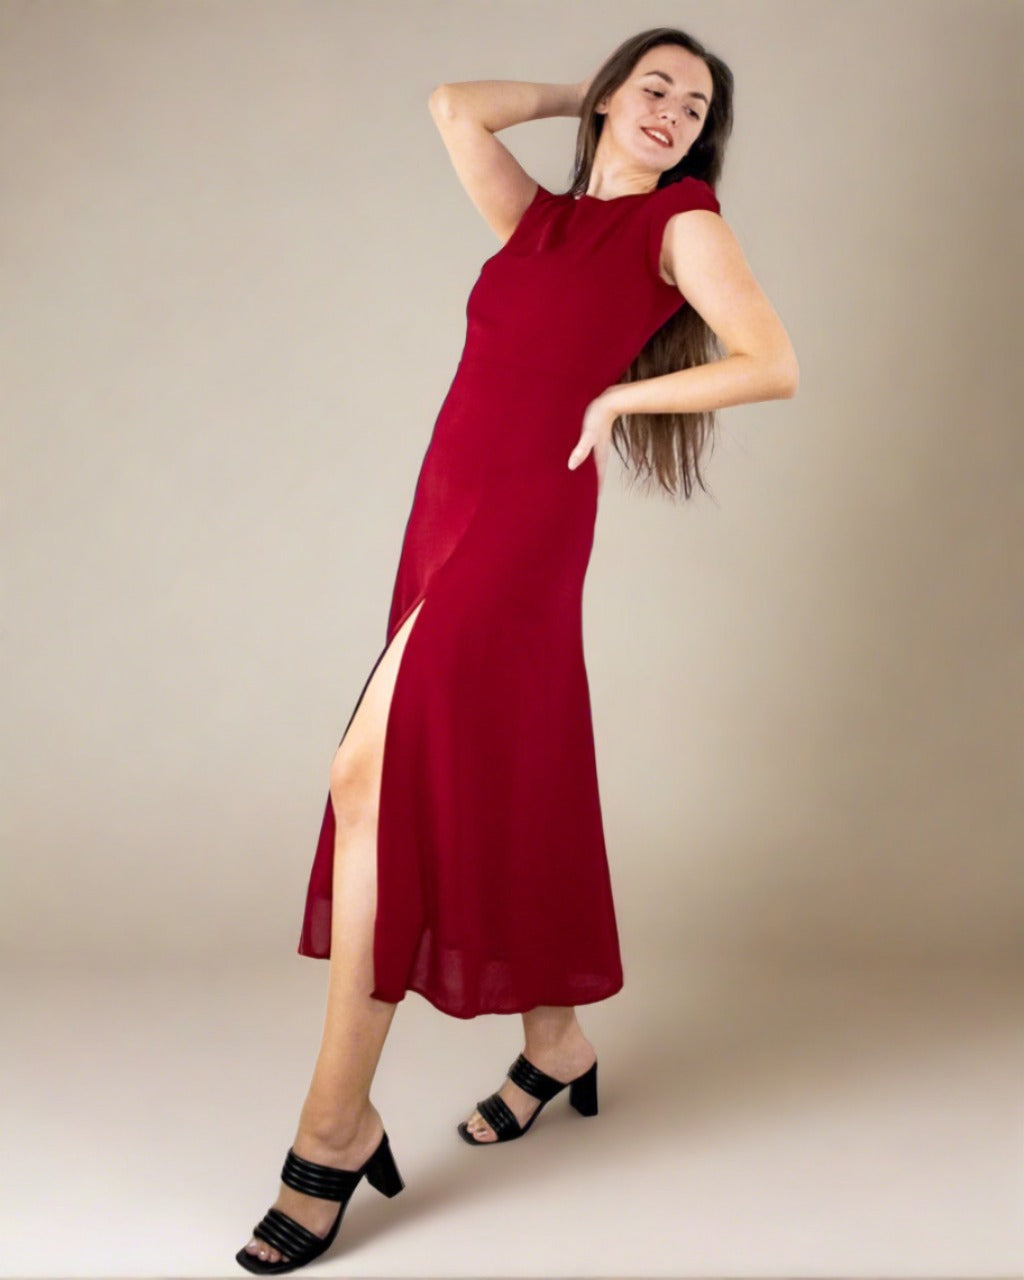 Red Midi Dress with Thigh Slit - Red Party Dress | ADKN UK